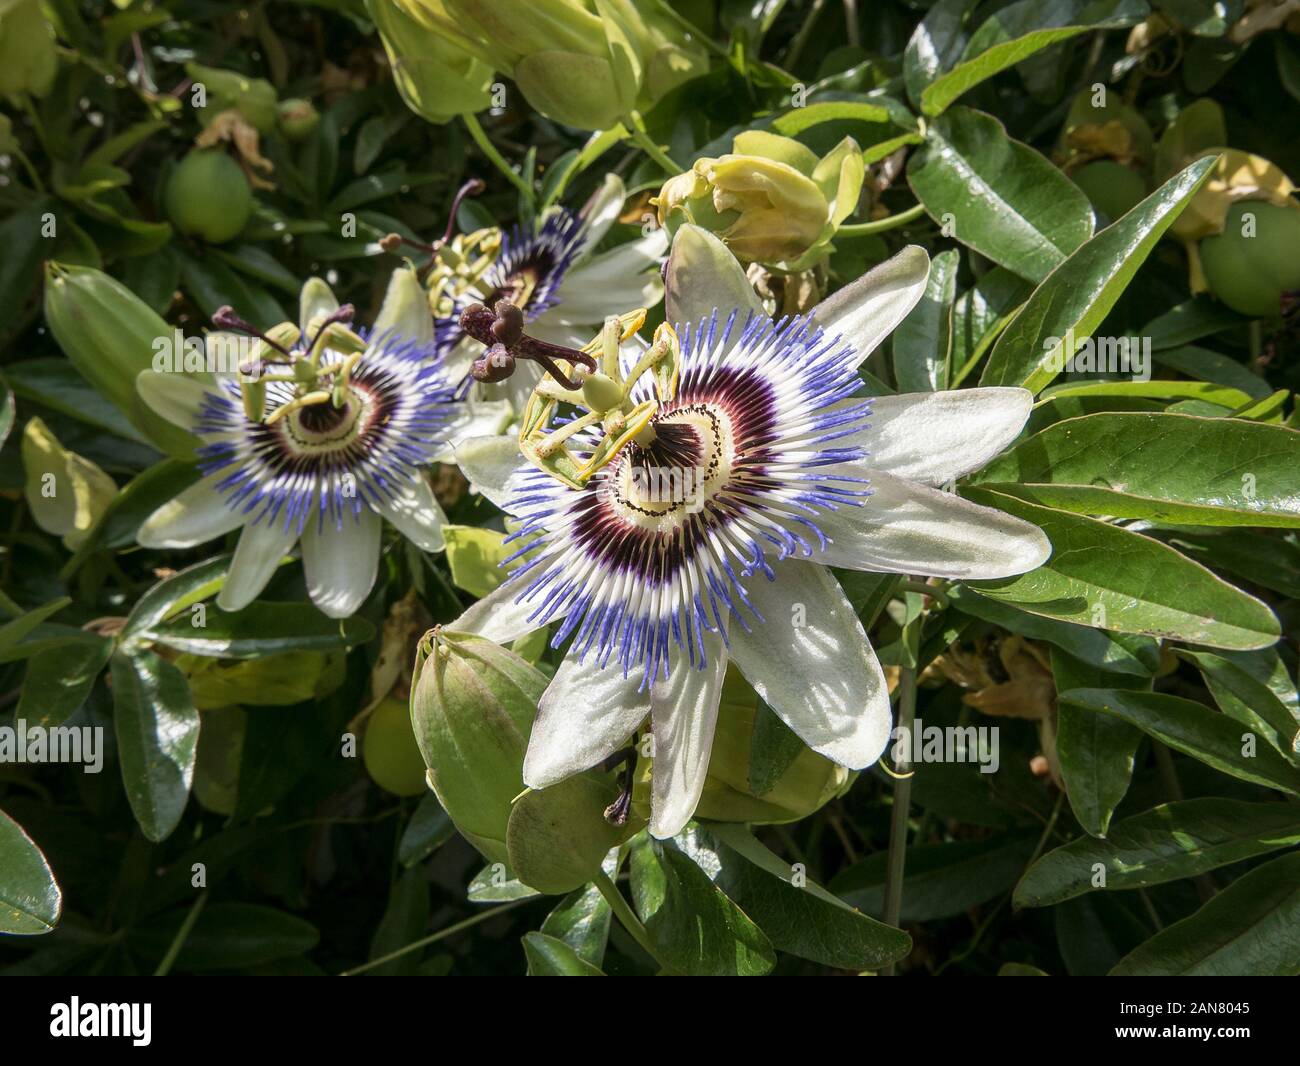 Passion flower flowering showing intricate details of its flower head Stock Photo